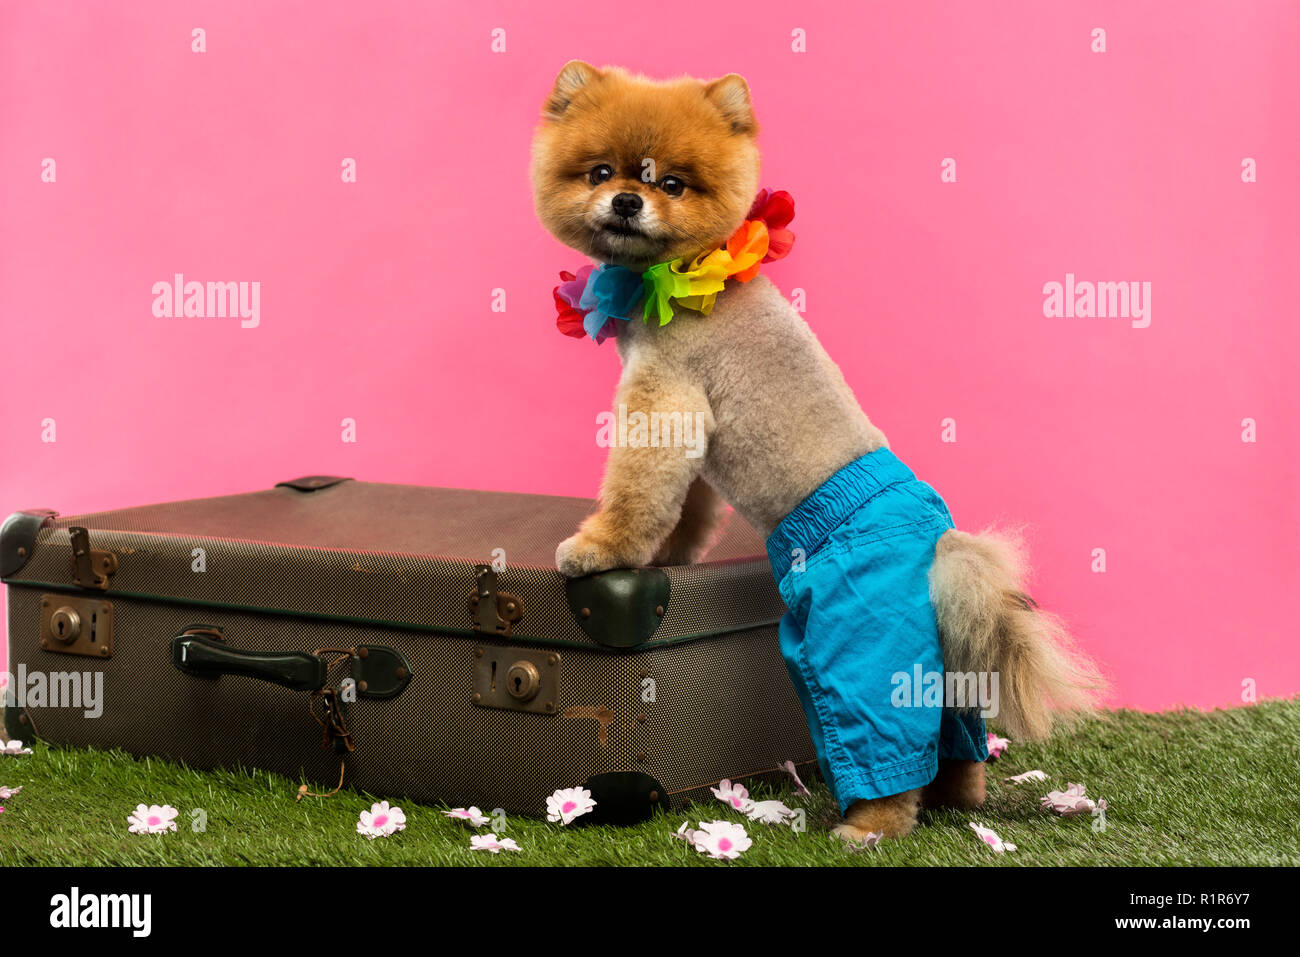 Groomed Pomeranian dog wearing shorts and Hawaiian lei and leaning on an old suitcase on grass in front of pink backgound Stock Photo